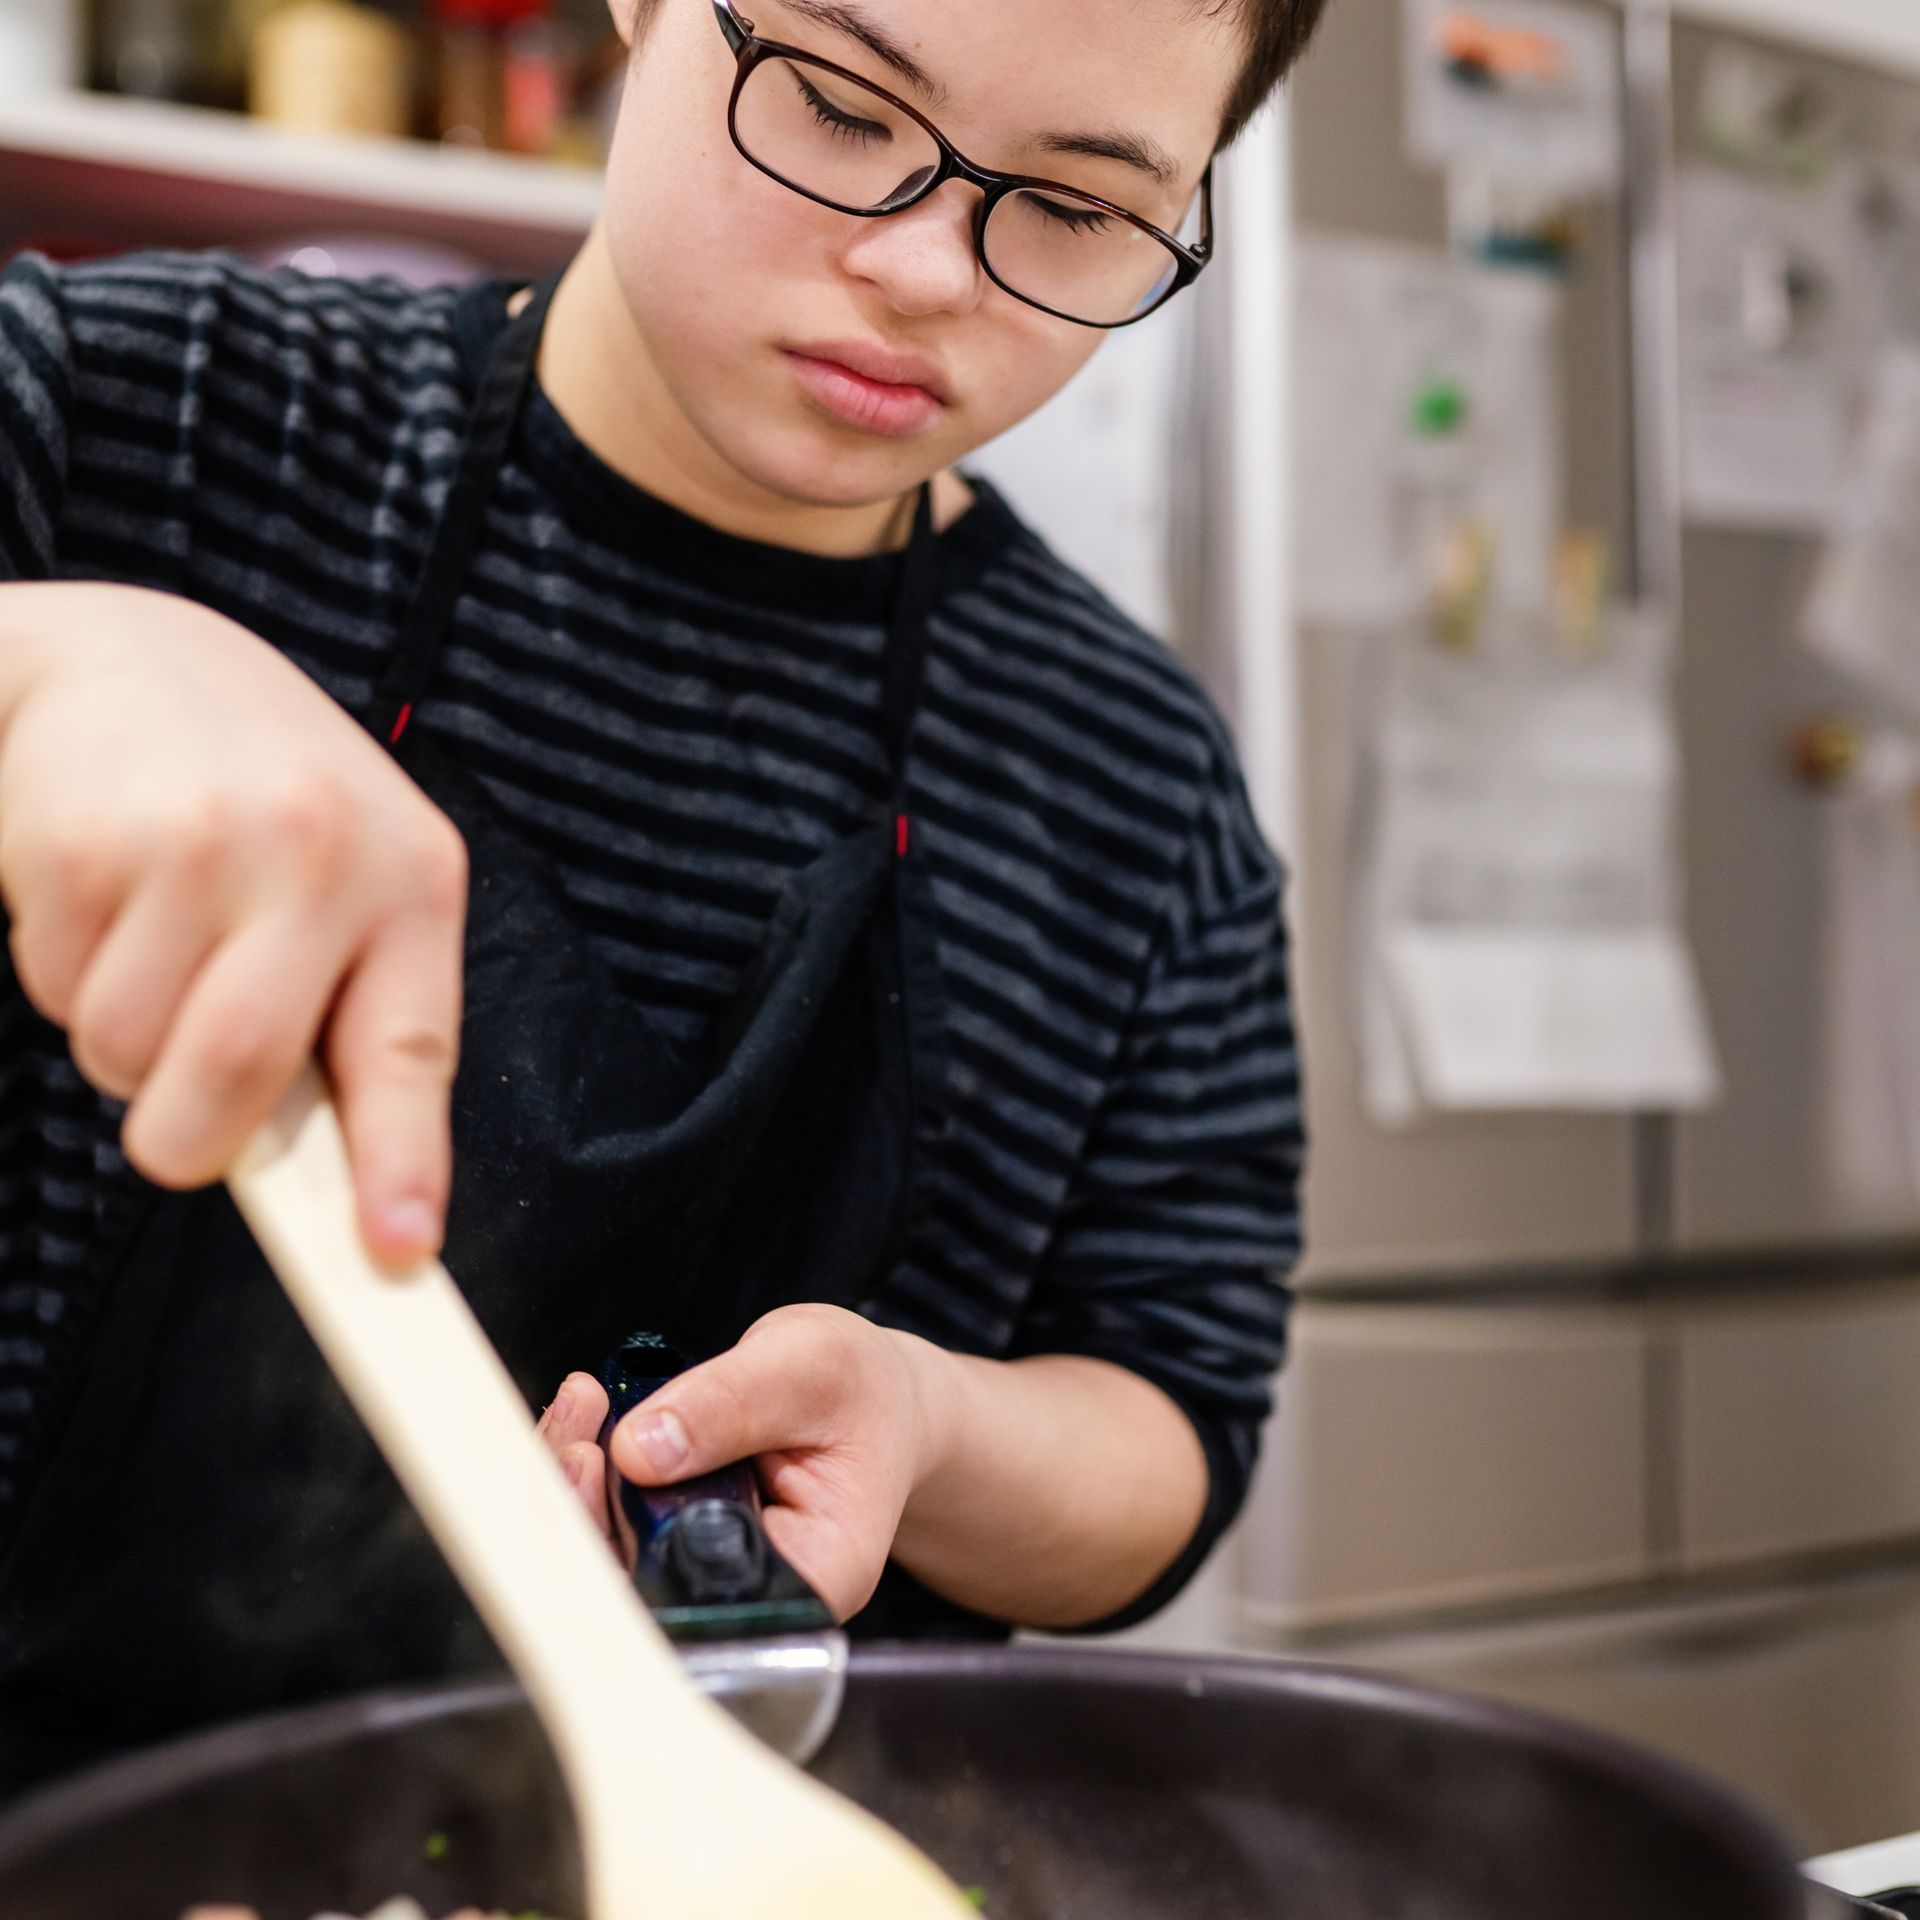 Young man with disability cooking